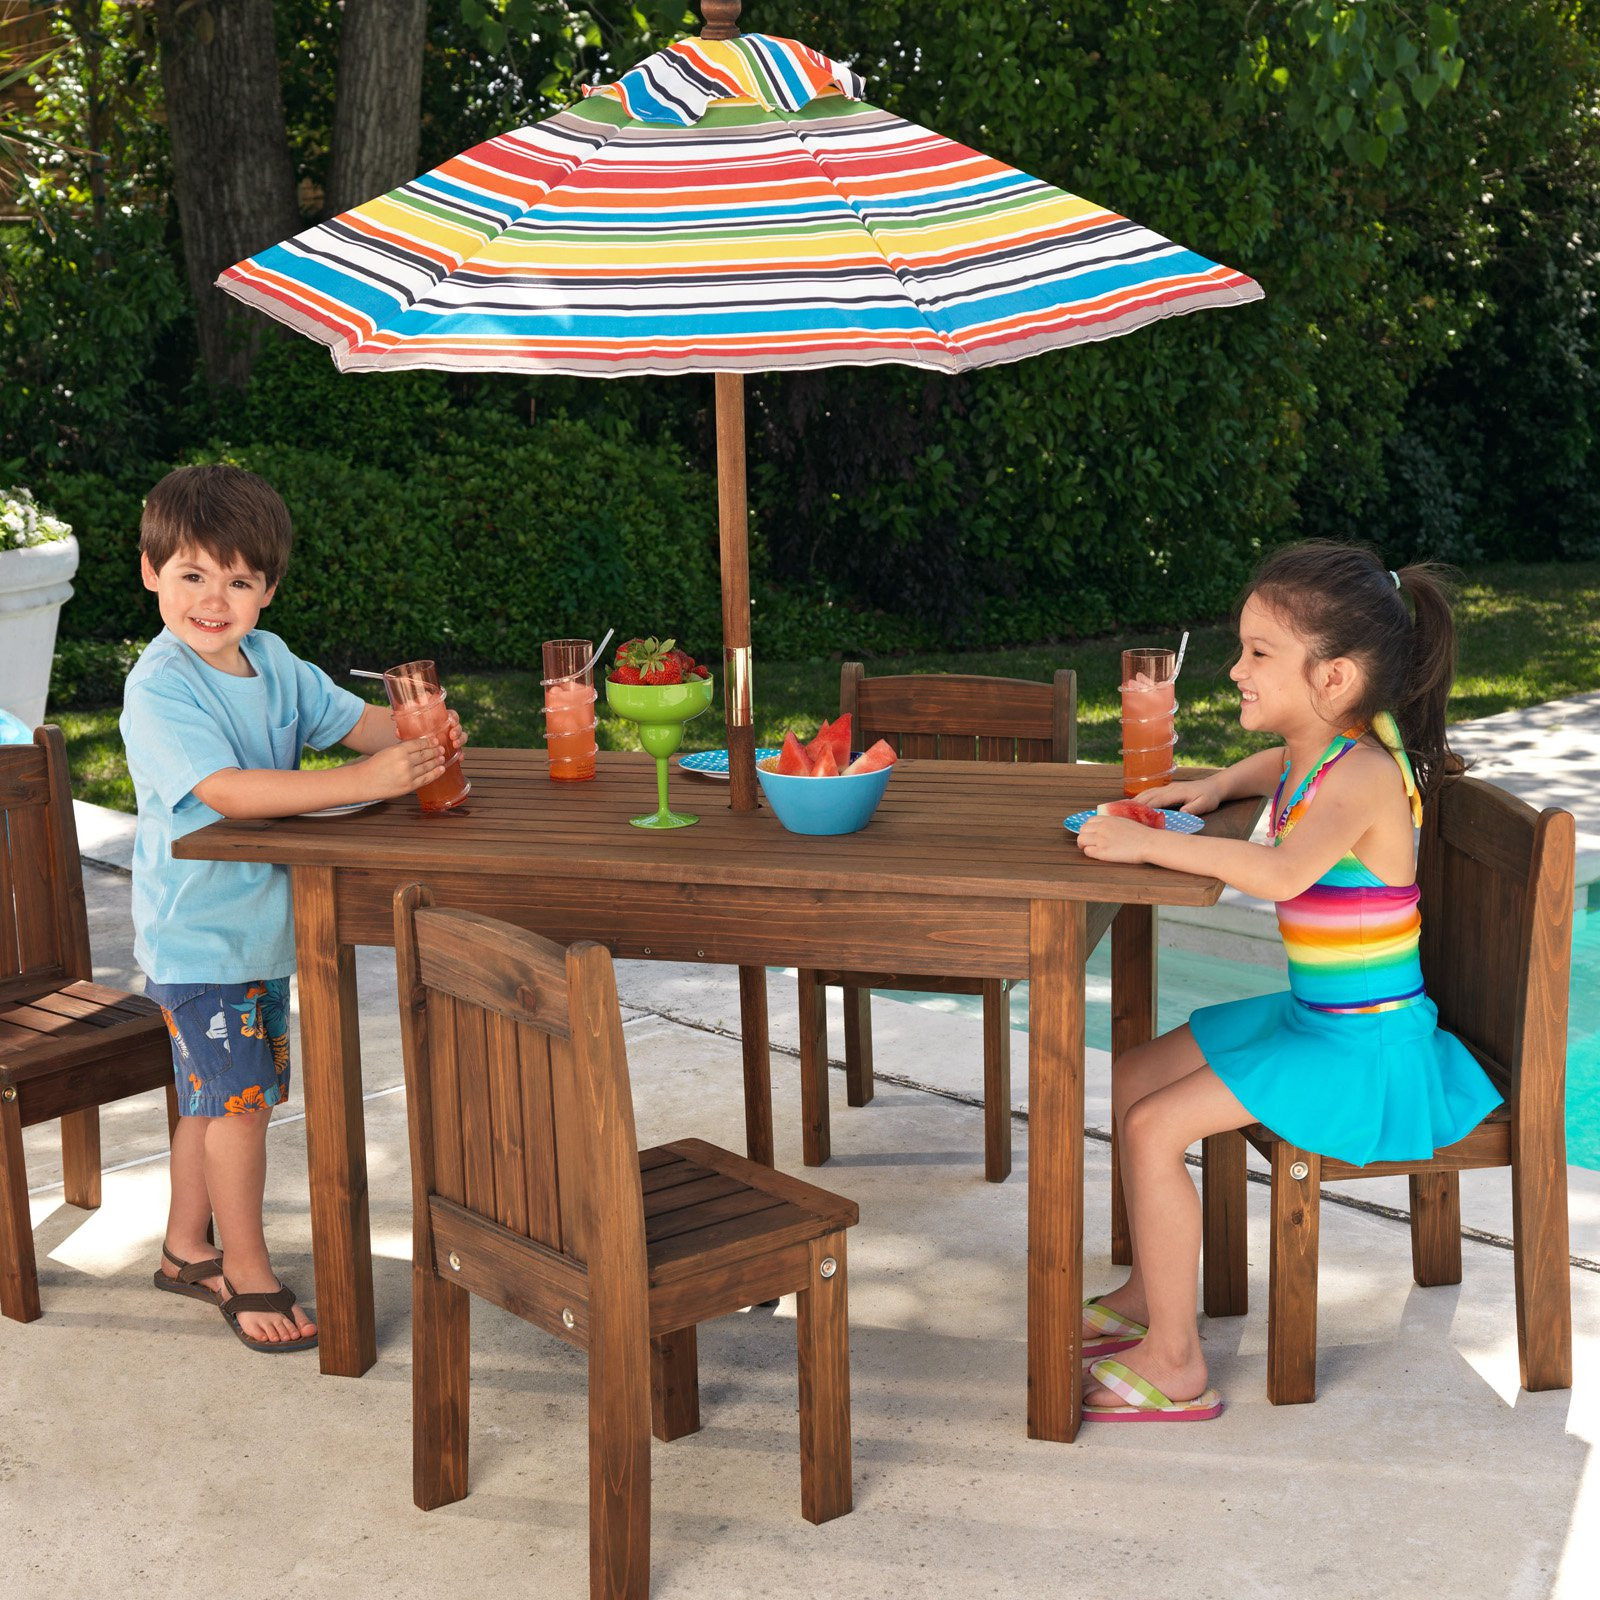 Kids Outdoor Table And Chair
 KidKraft Outdoor Table and 4 Stacking Chairs with Striped